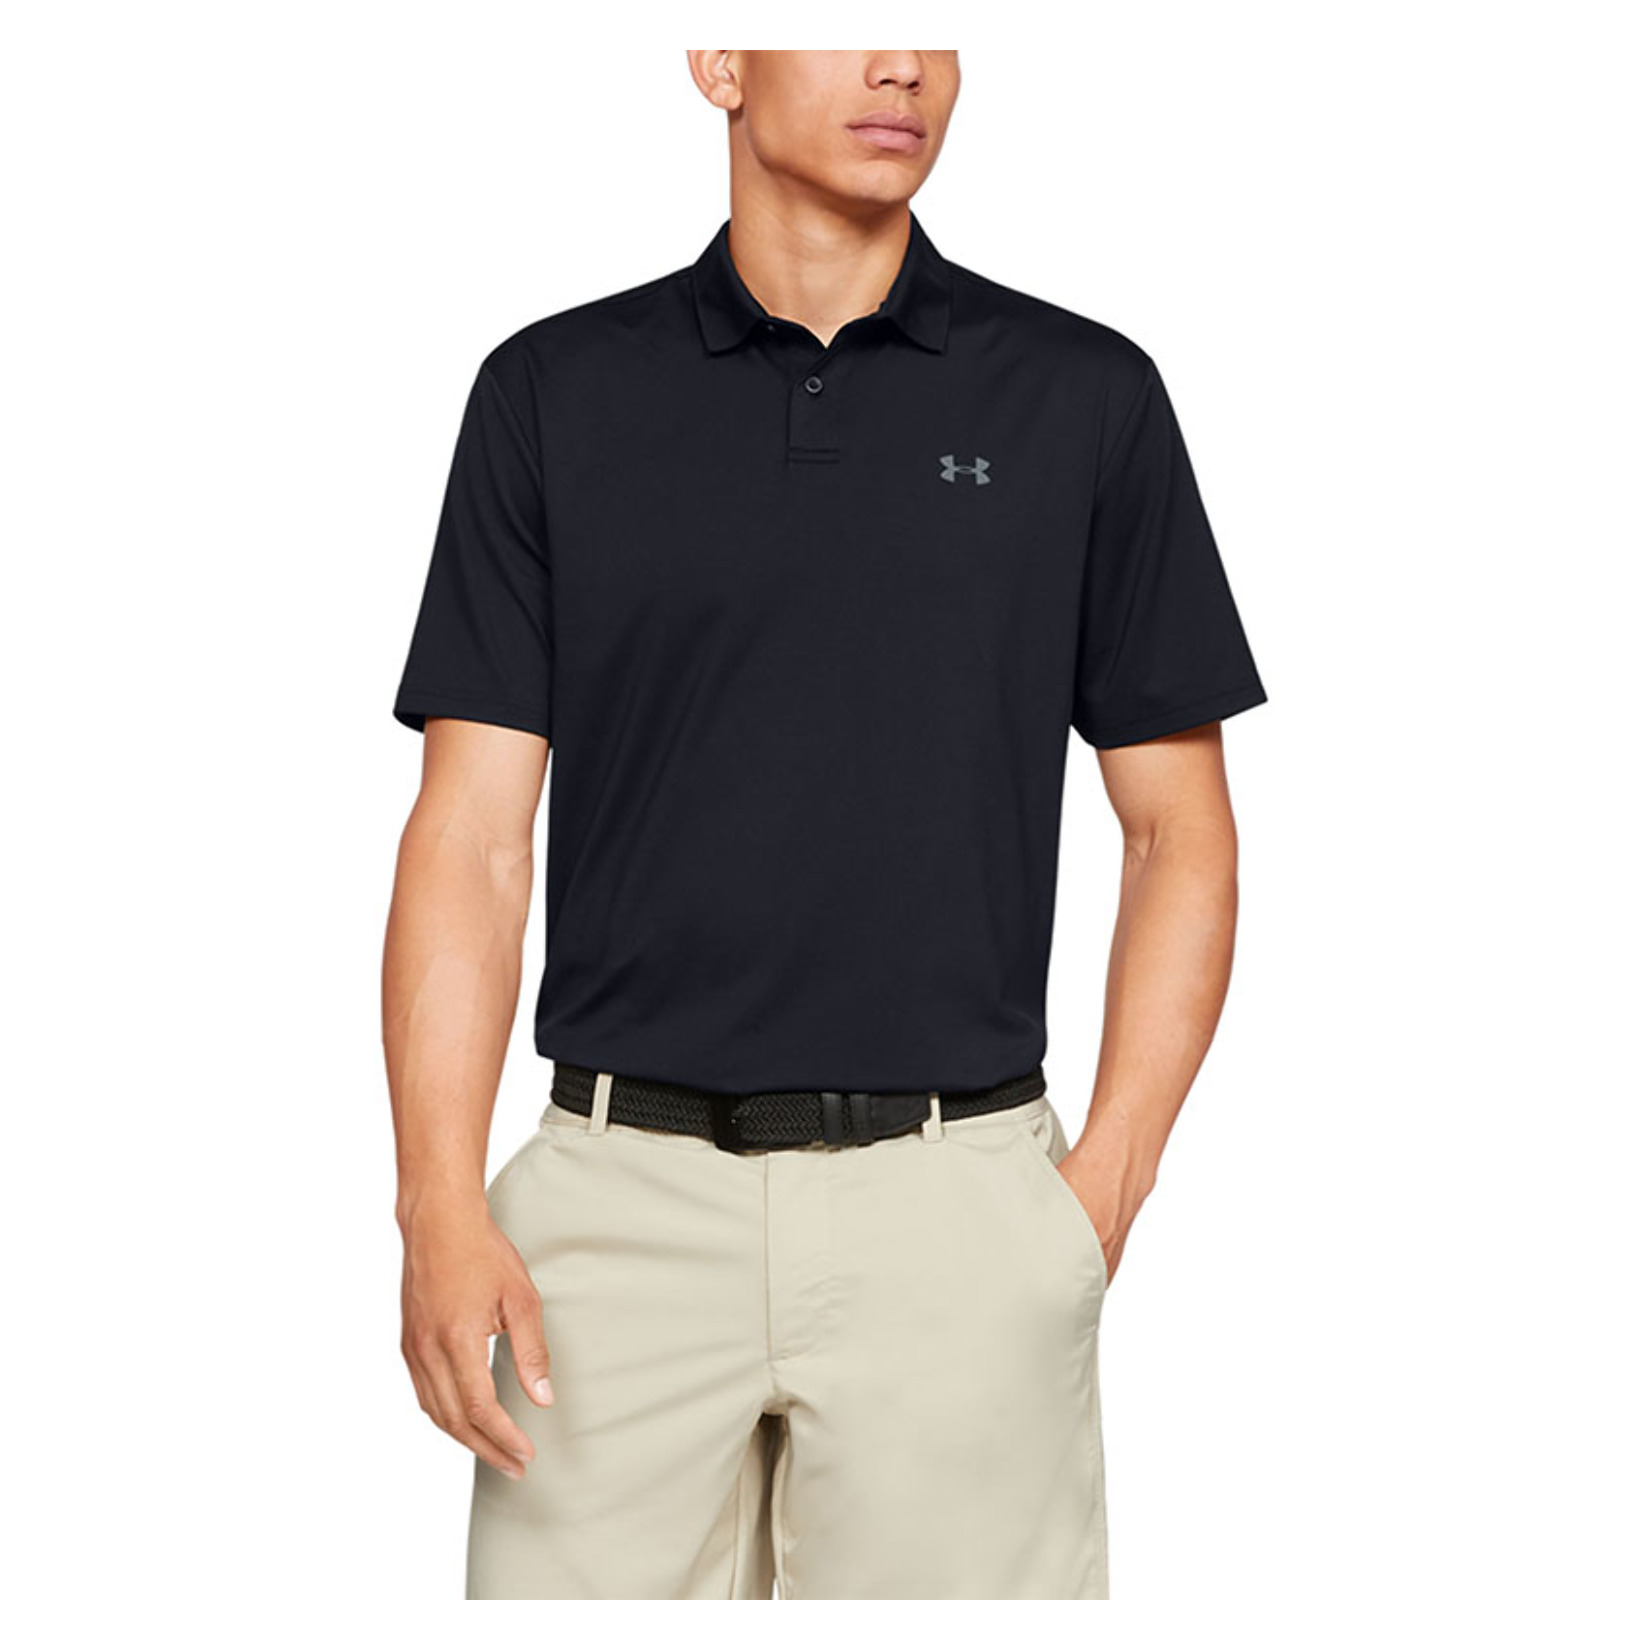 Under Armour Performance Textured Polo 2.0